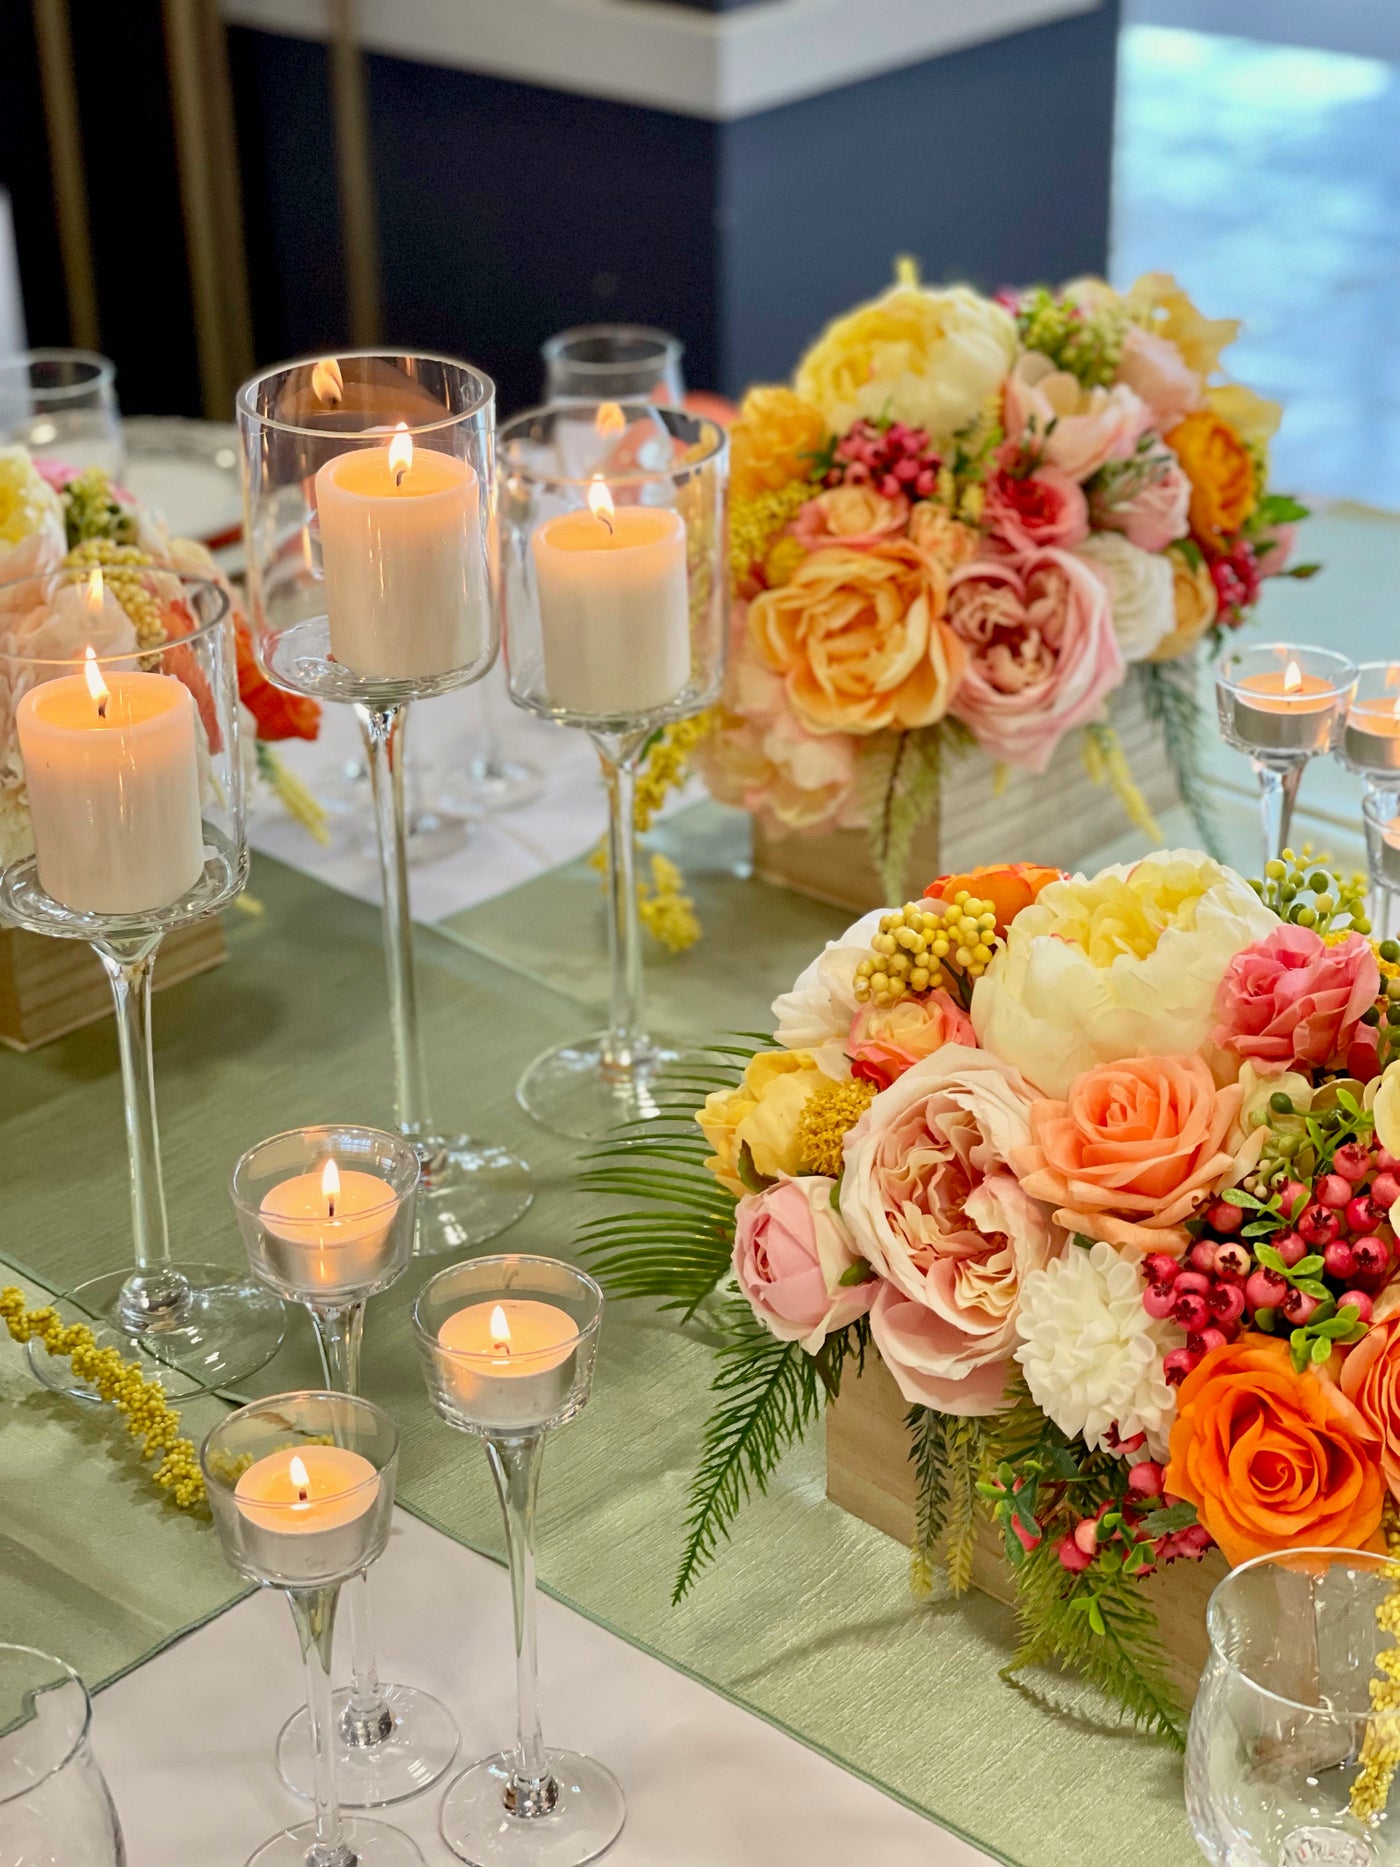 Rent a Rose- Centrepiece- orange, yellow and pink flowers-  Rent for five days for $54.00.